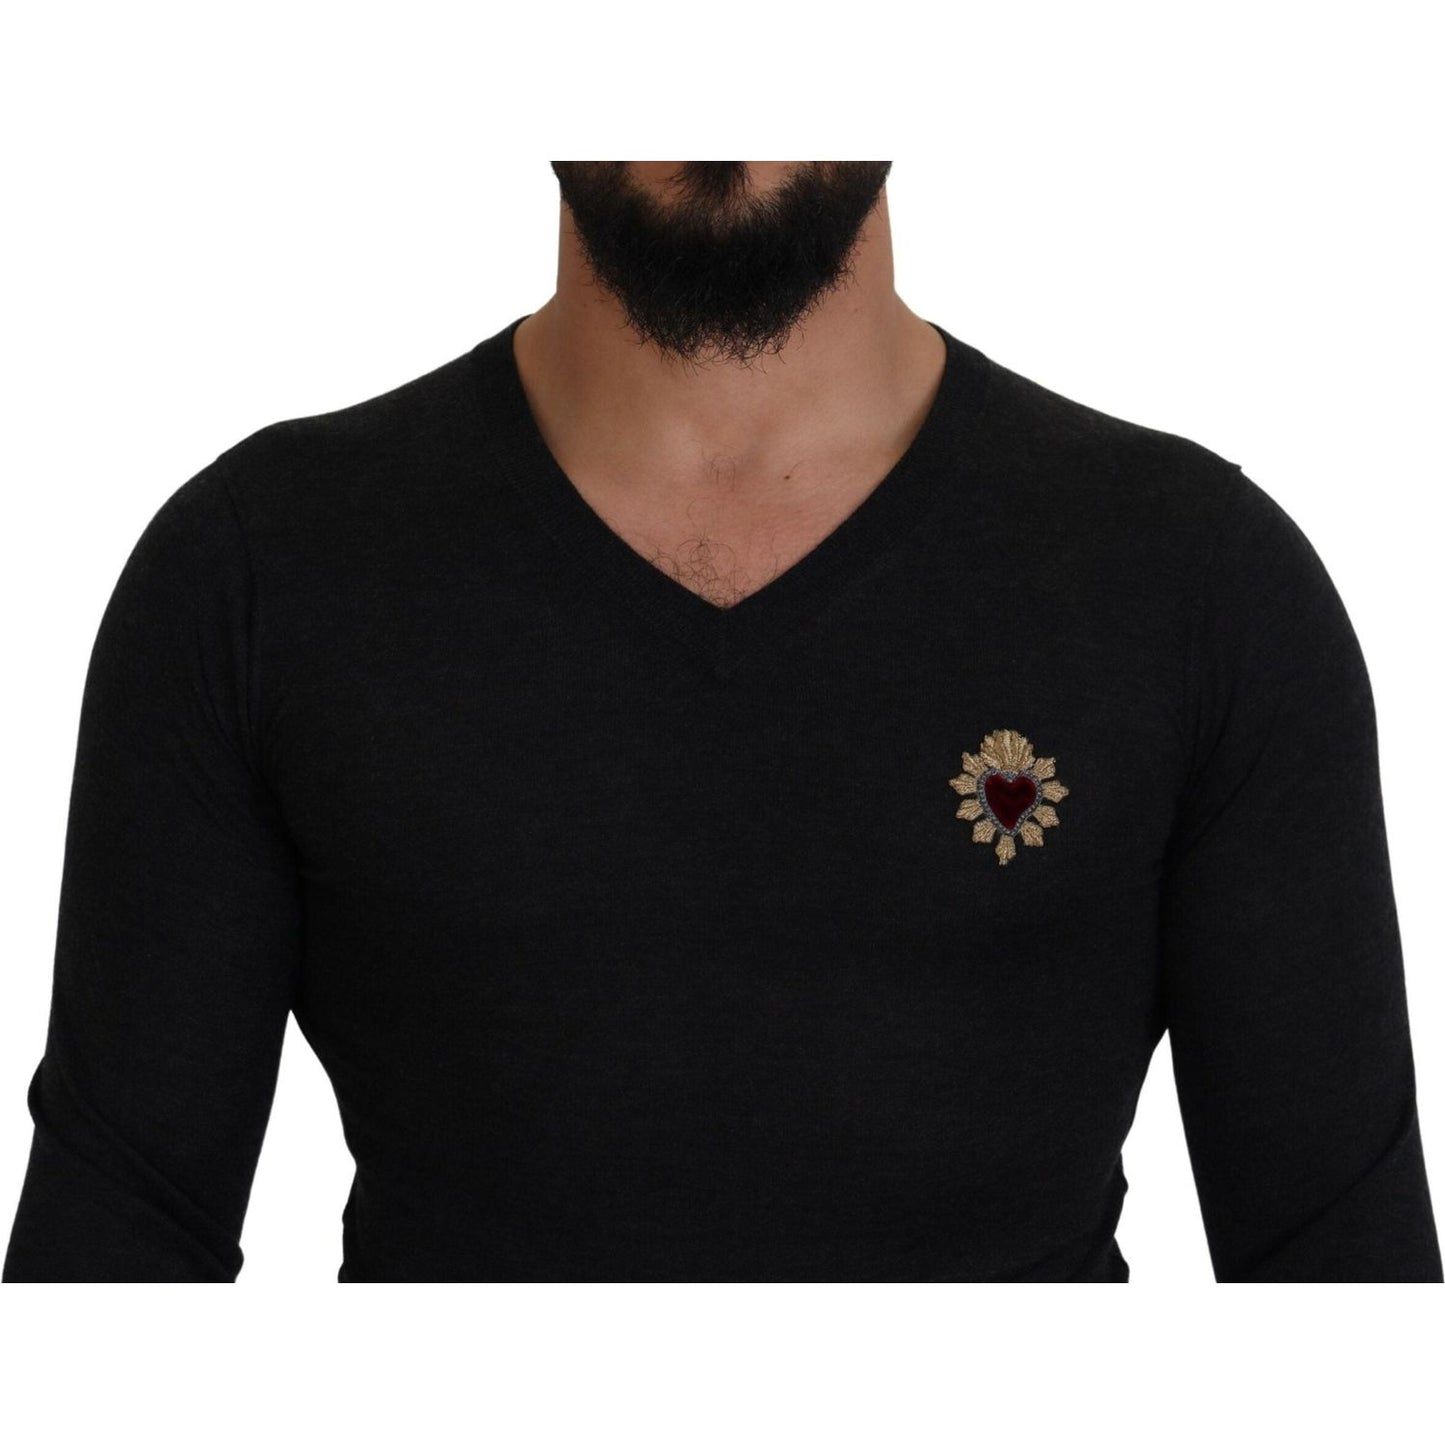 Dolce & Gabbana V-Neck Cashmere Sweater with Heart Embroidery gray-cashmere-v-neck-gold-heart-sweater IMG_2068-scaled-66dce3e5-79a.jpg